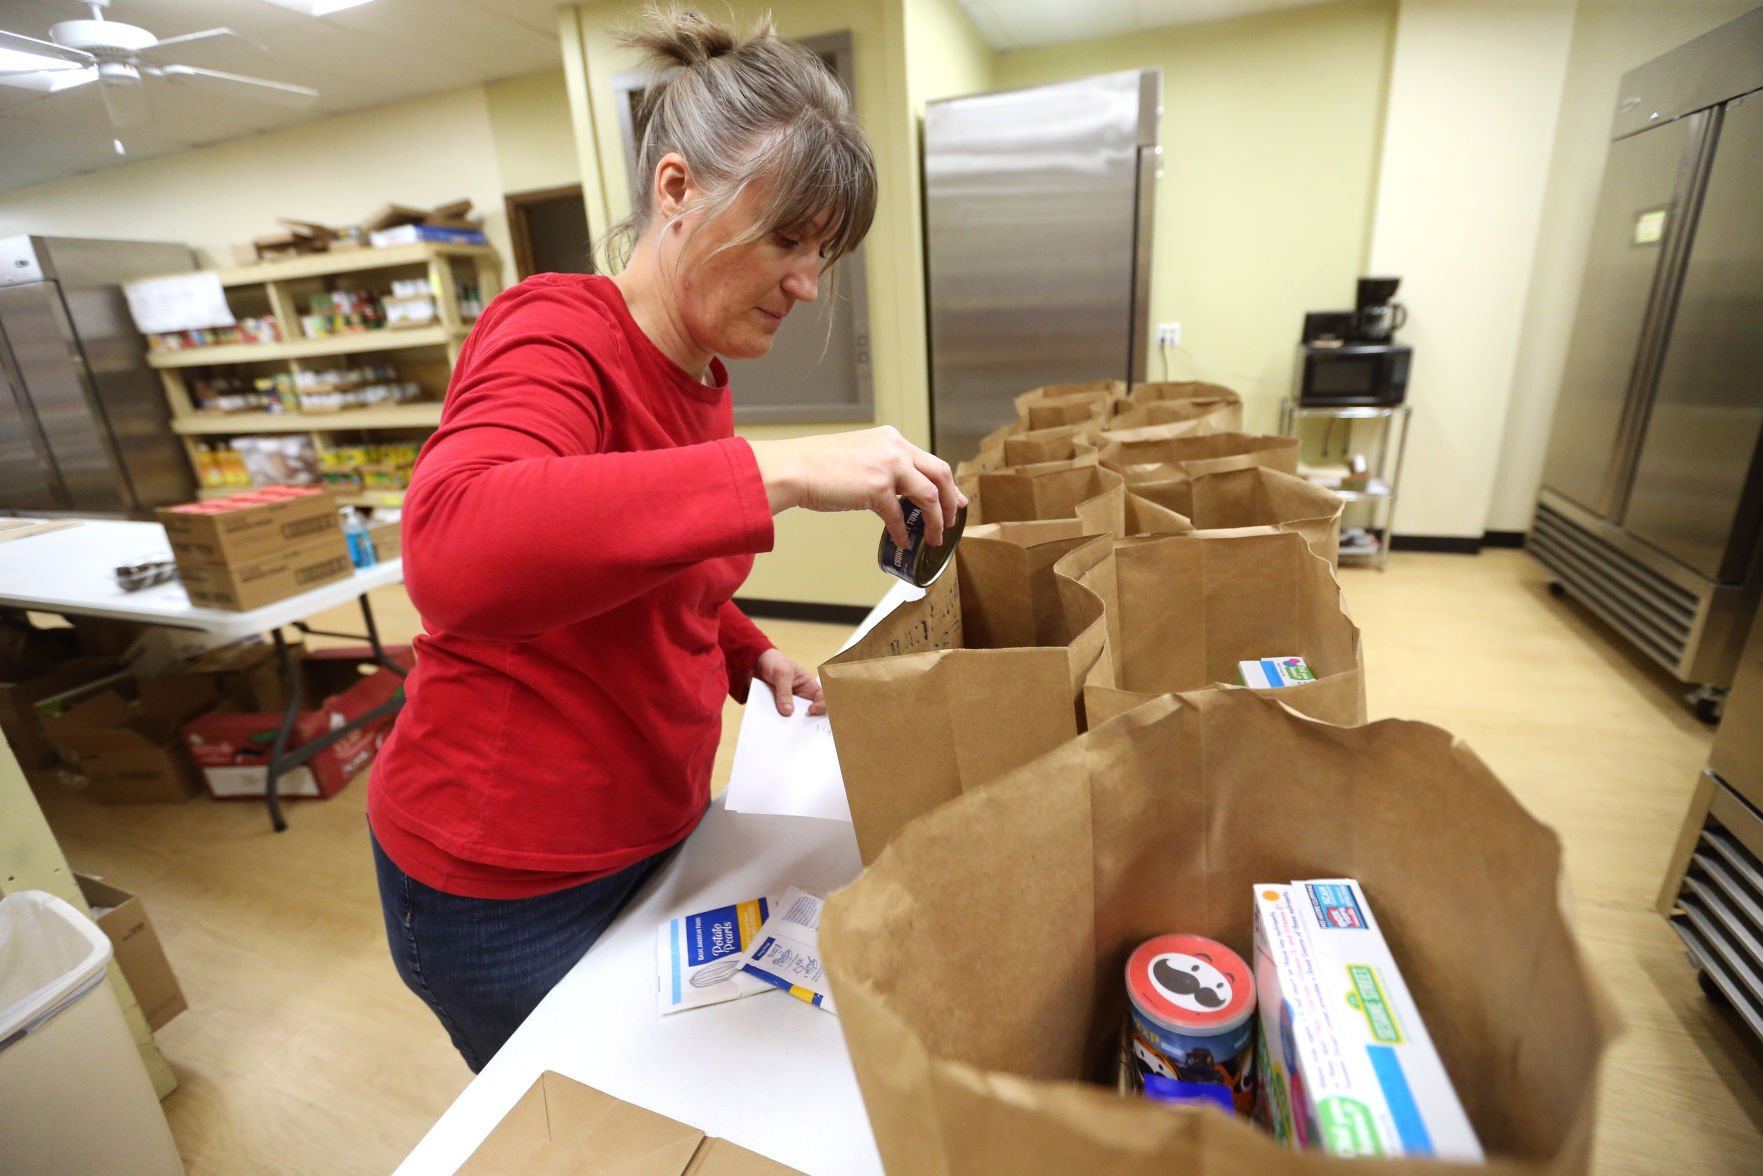 Becca Brosius, a part-time employee with the Dubuque Food Pantry, fills bags at the pantry on Tuesday.    PHOTO CREDIT: JESSICA REILLY